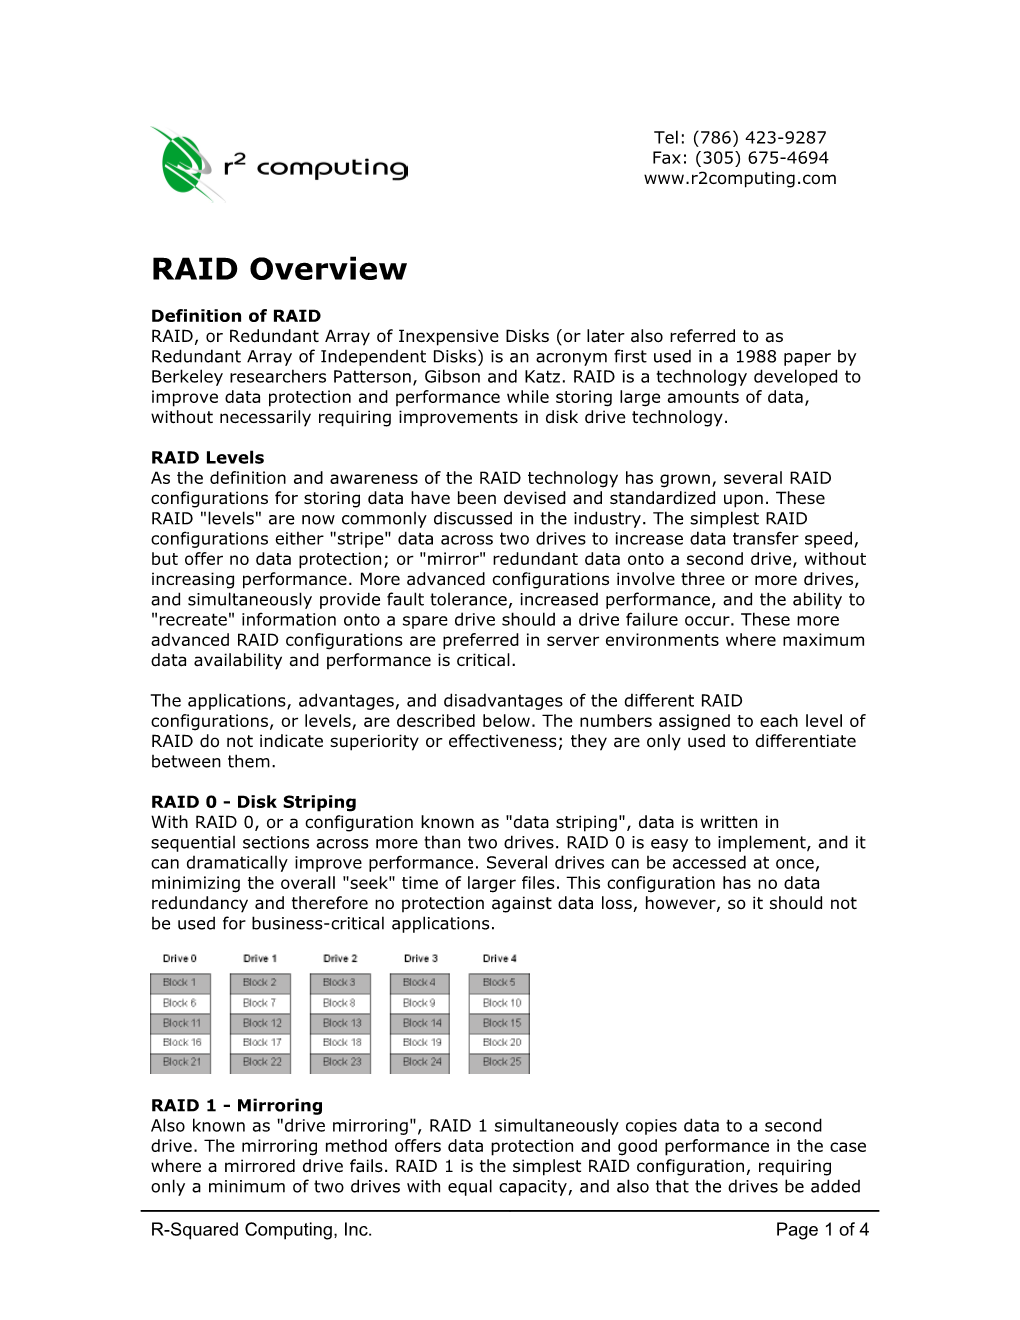 RAID Overview Definition of RAID RAID, Or Redundant Array of Inexpensive Disks (Or Later